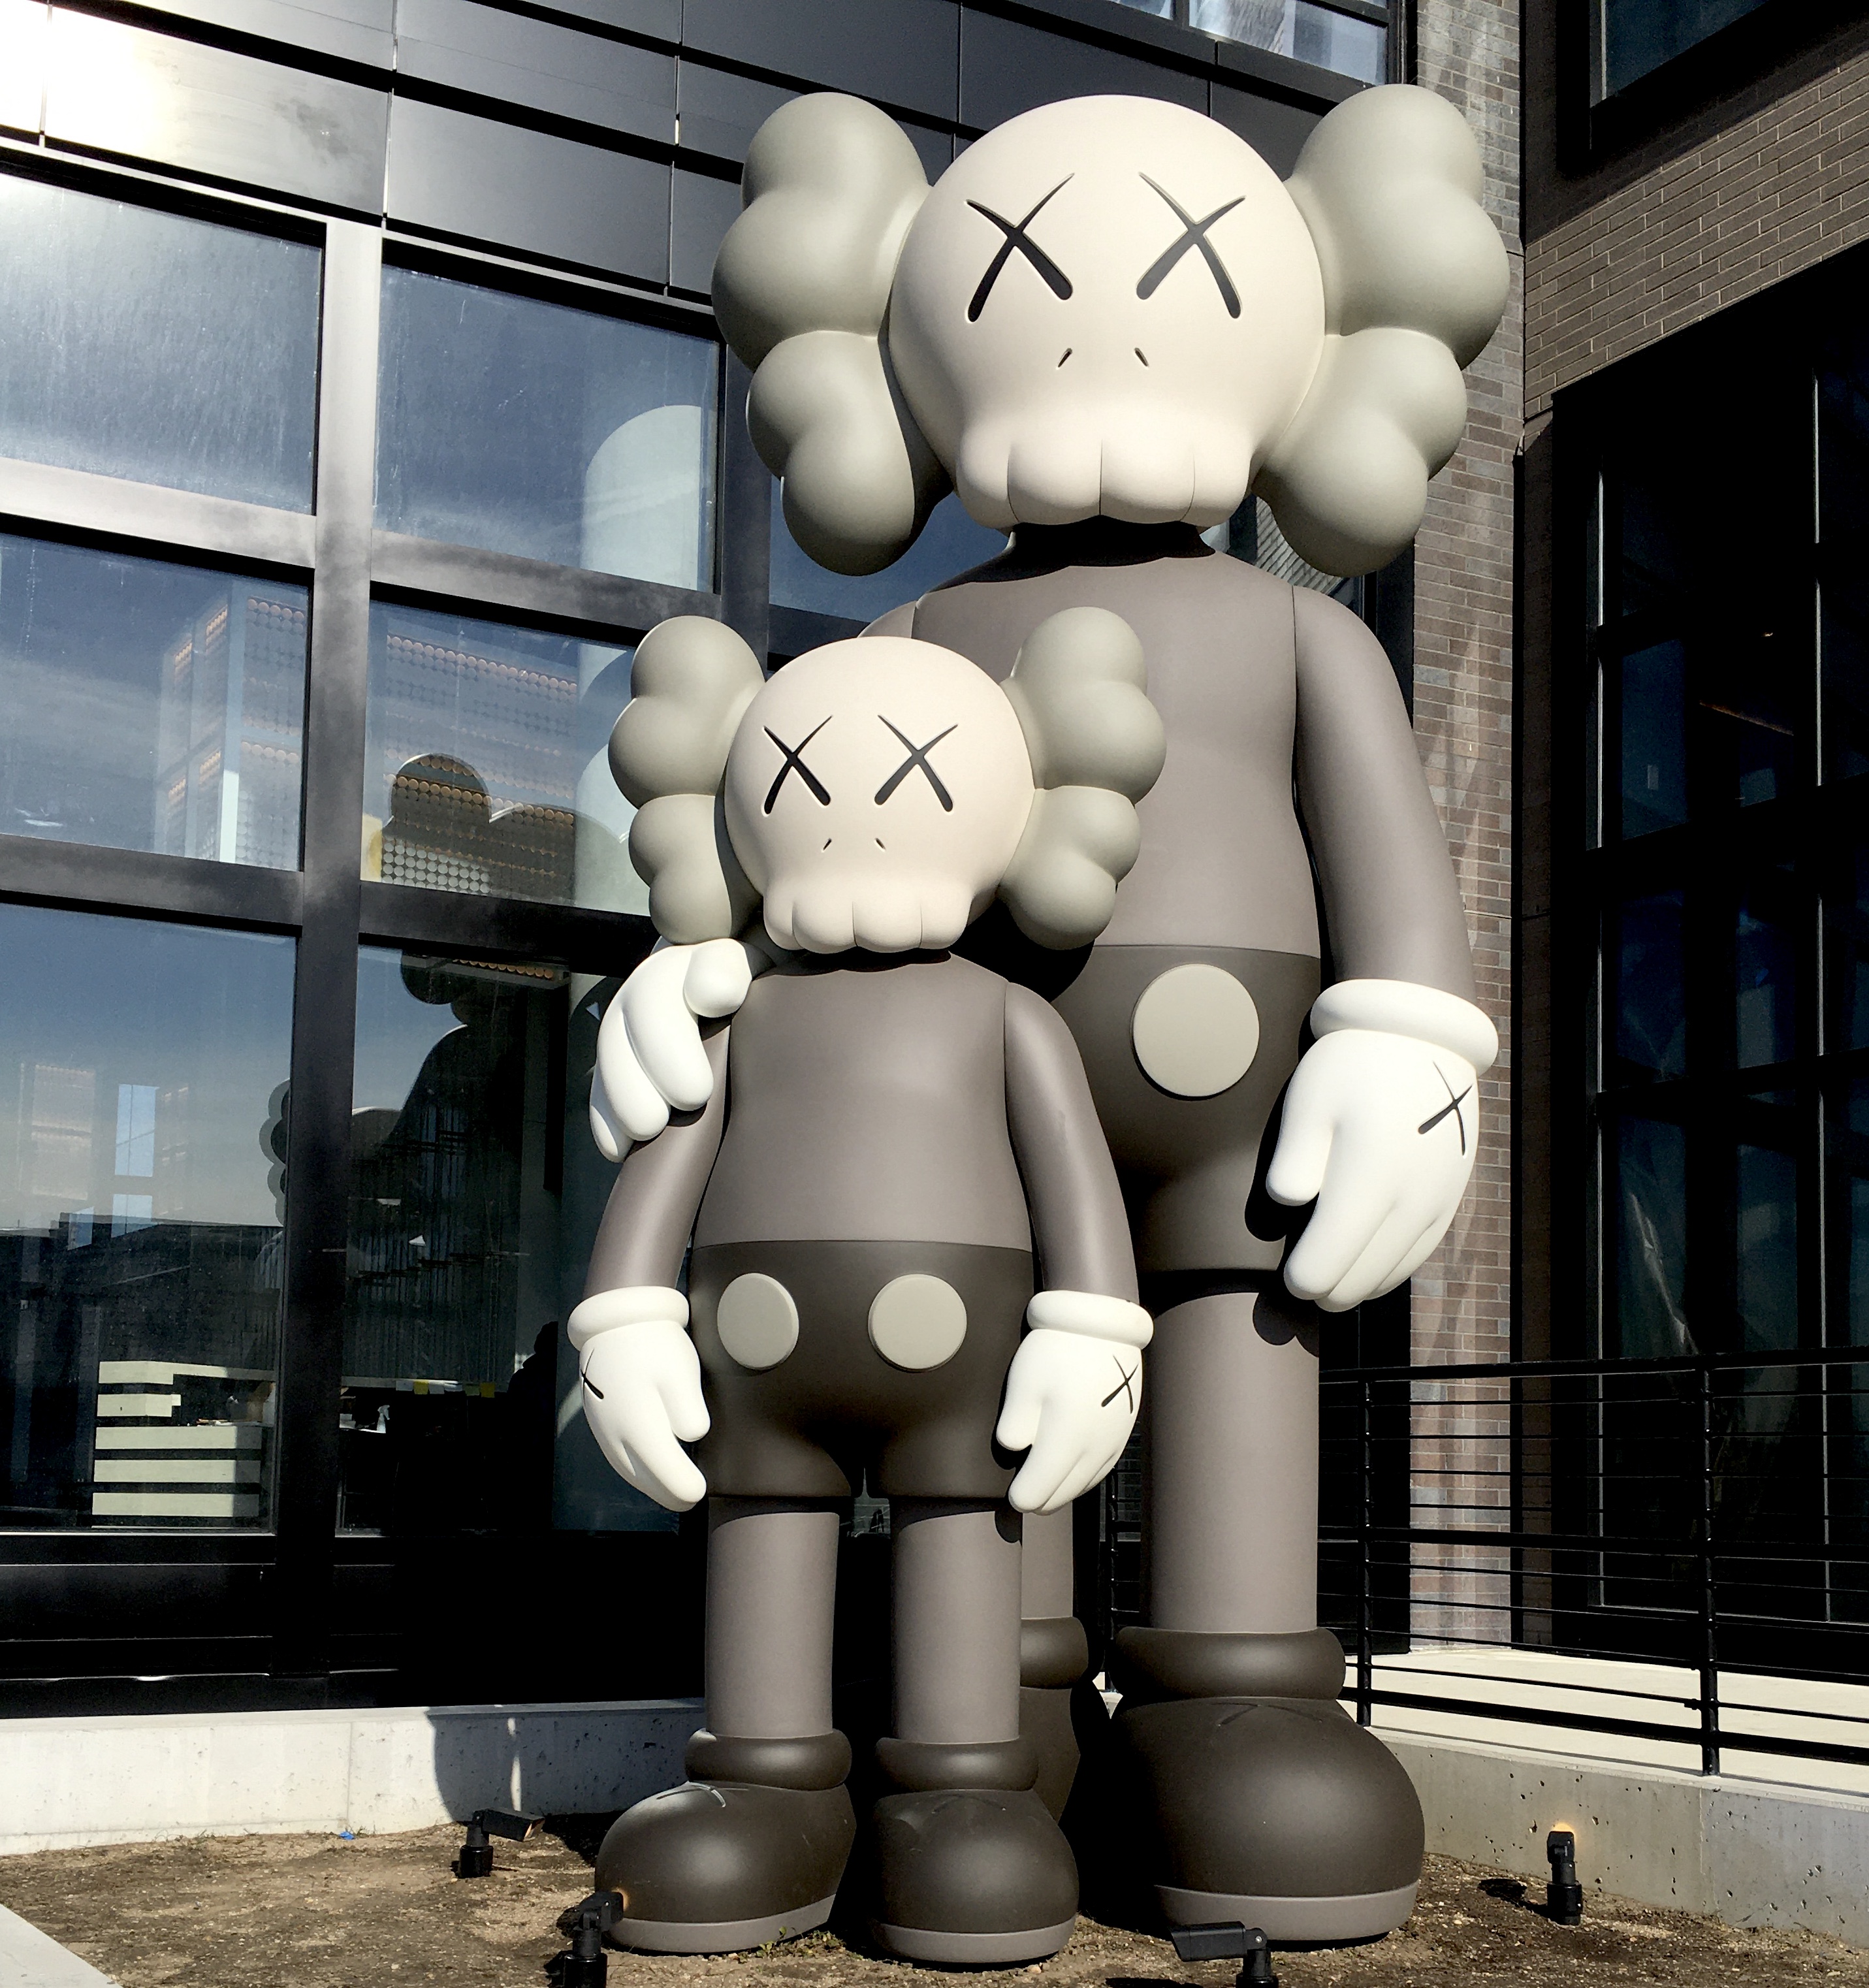 An artist named KAWS designed this sculpture, which is called “Waiting.” Photo: Lore Croghan/Brooklyn Eagle